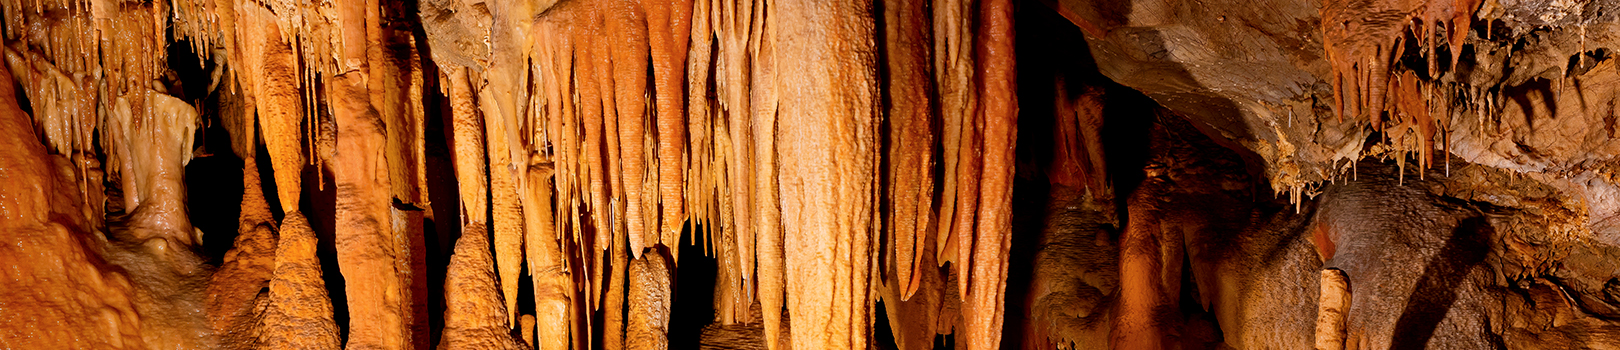 Orange cave formations hang ominously from the ceiling of Kartchner's cave.